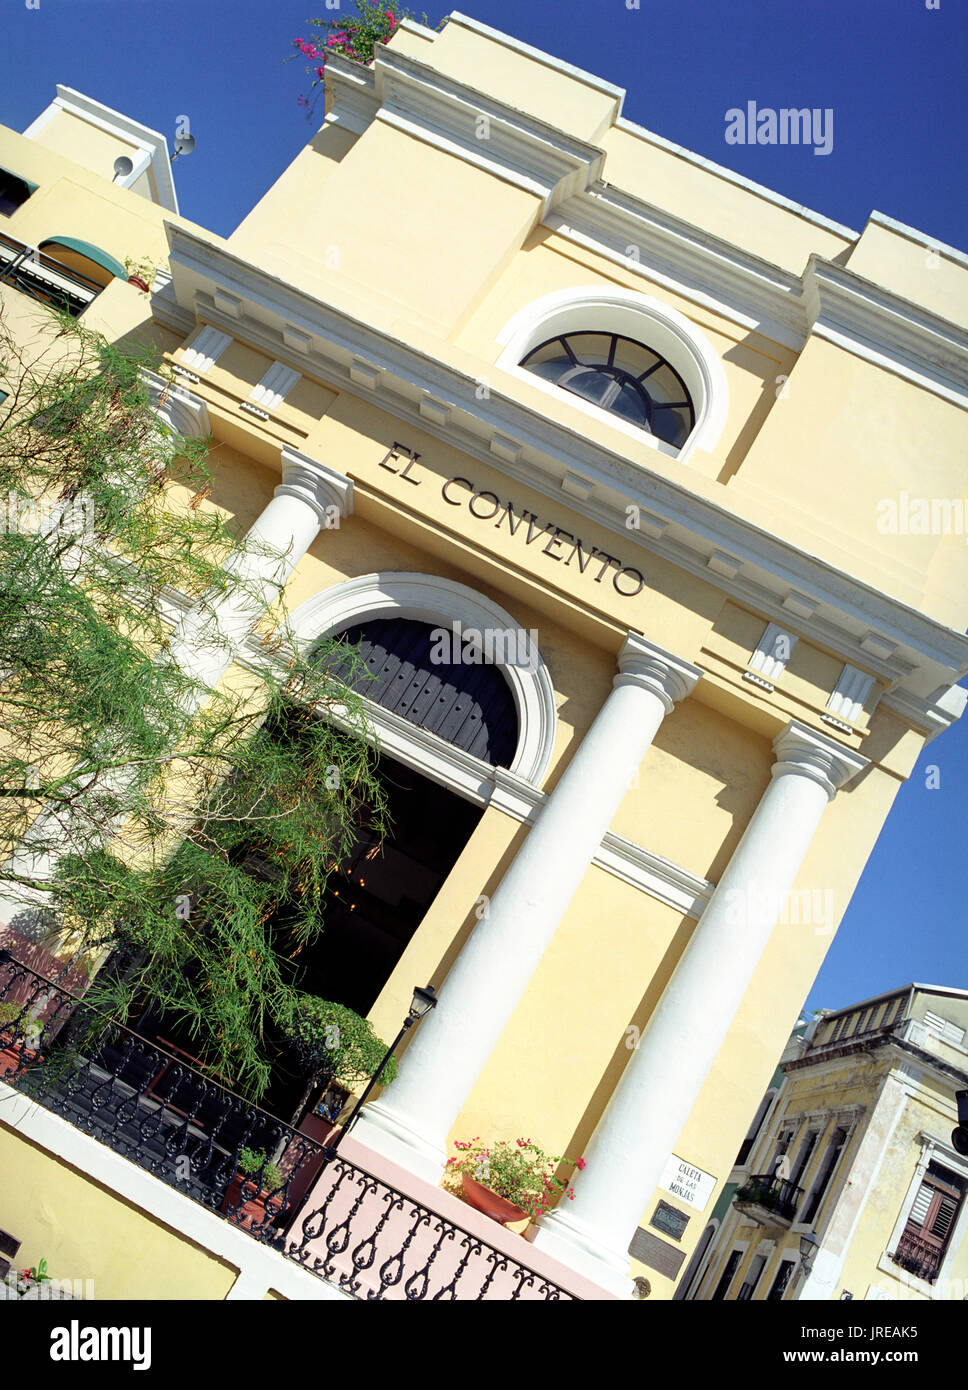 The outside entrance to the El Convento hotel in Old San Juan. An architectural landmark in the heart of historic Old San Juan, El Convento is a forme Stock Photo